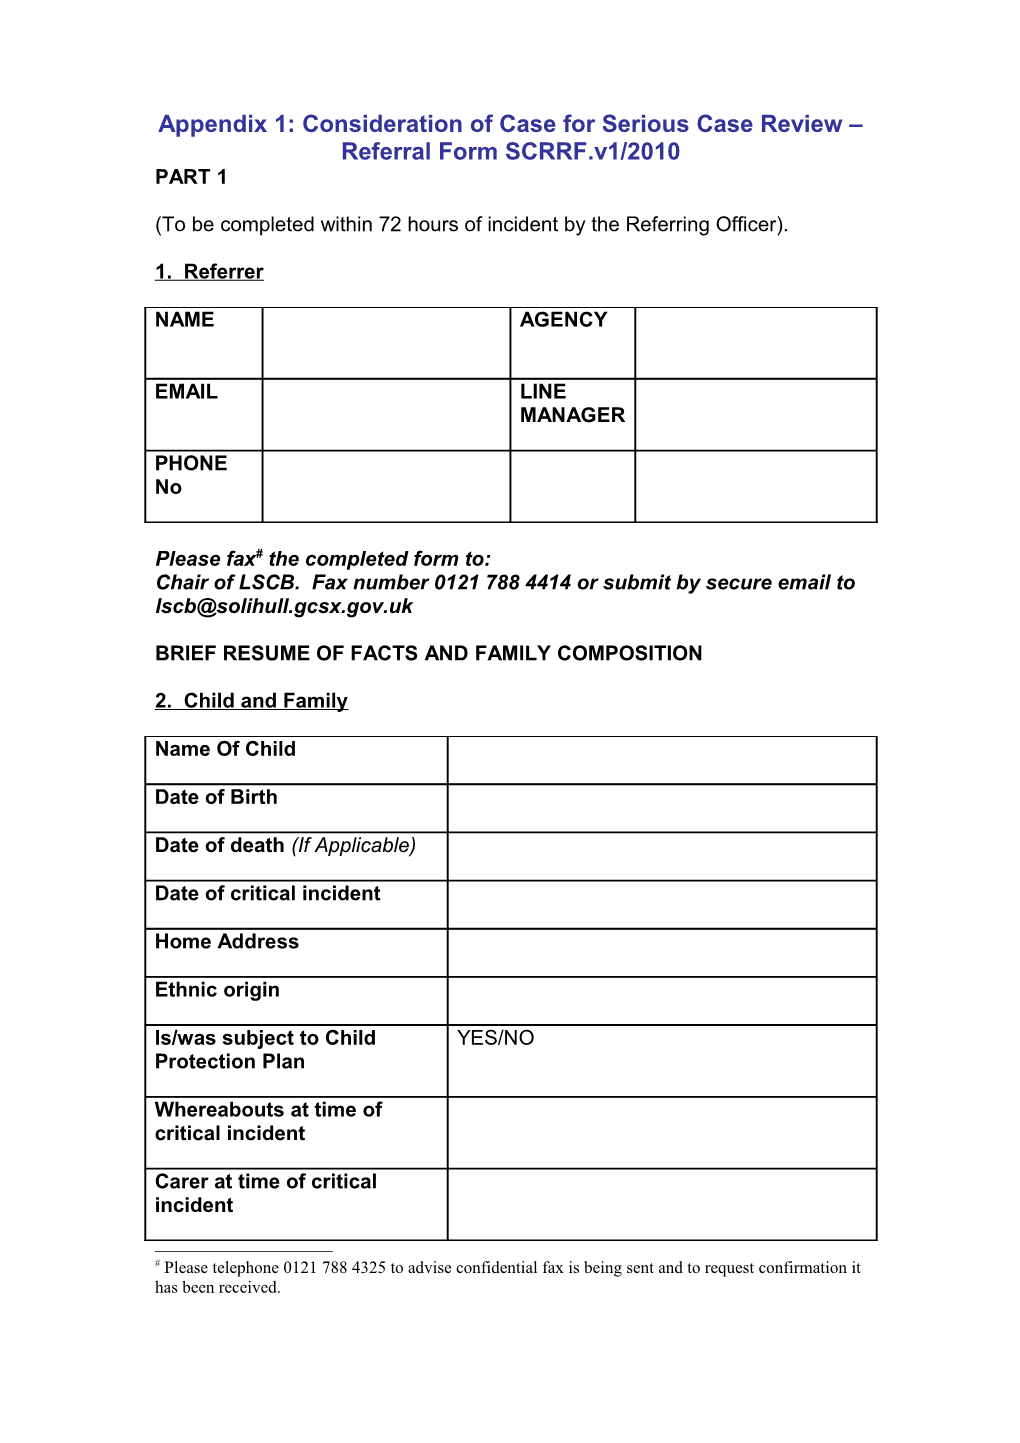 Appendix 1:Consideration of Case for Serious Case Review Referral Form SCRRF.V1/2010